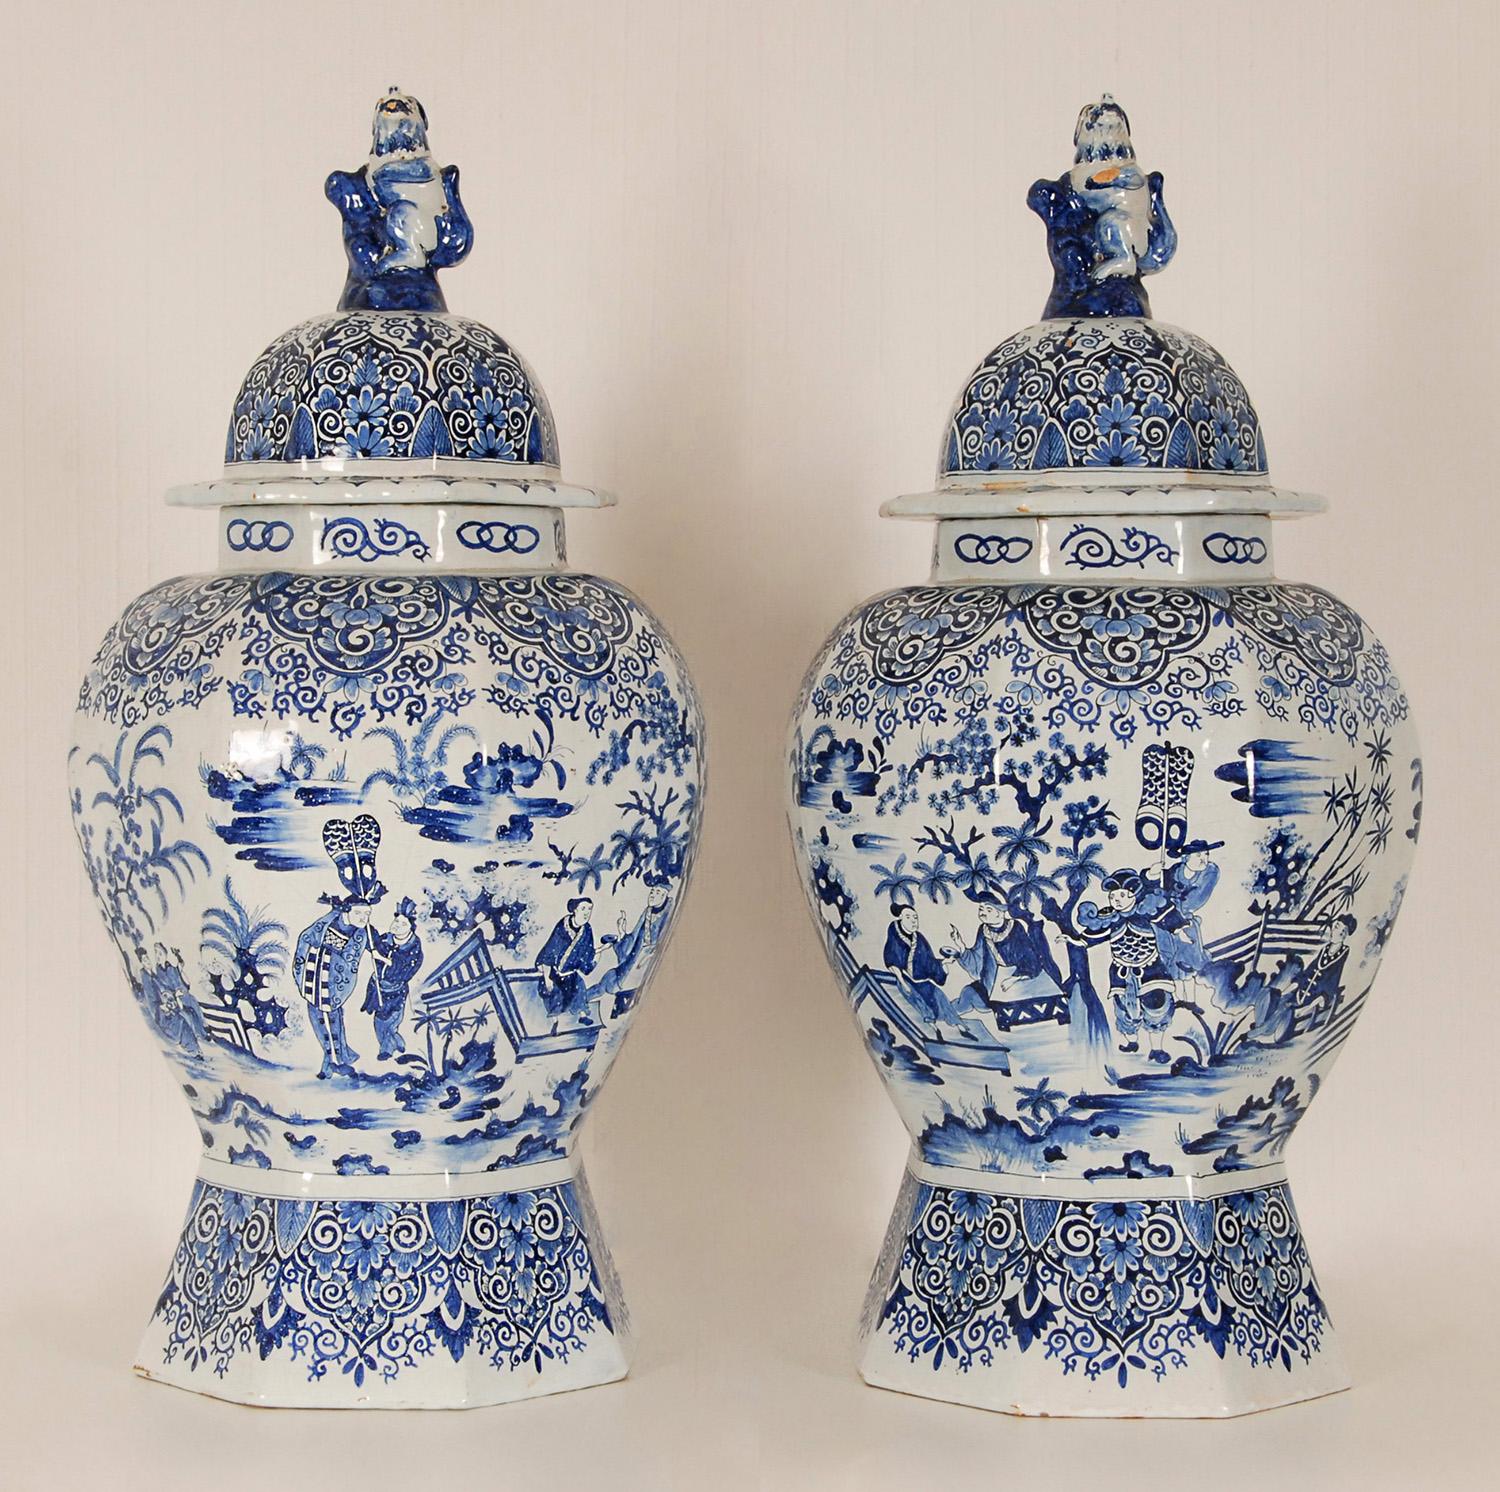 Delft Vases 17th century Style Earthenware Blue White Tall Baluster Vases a pair 12